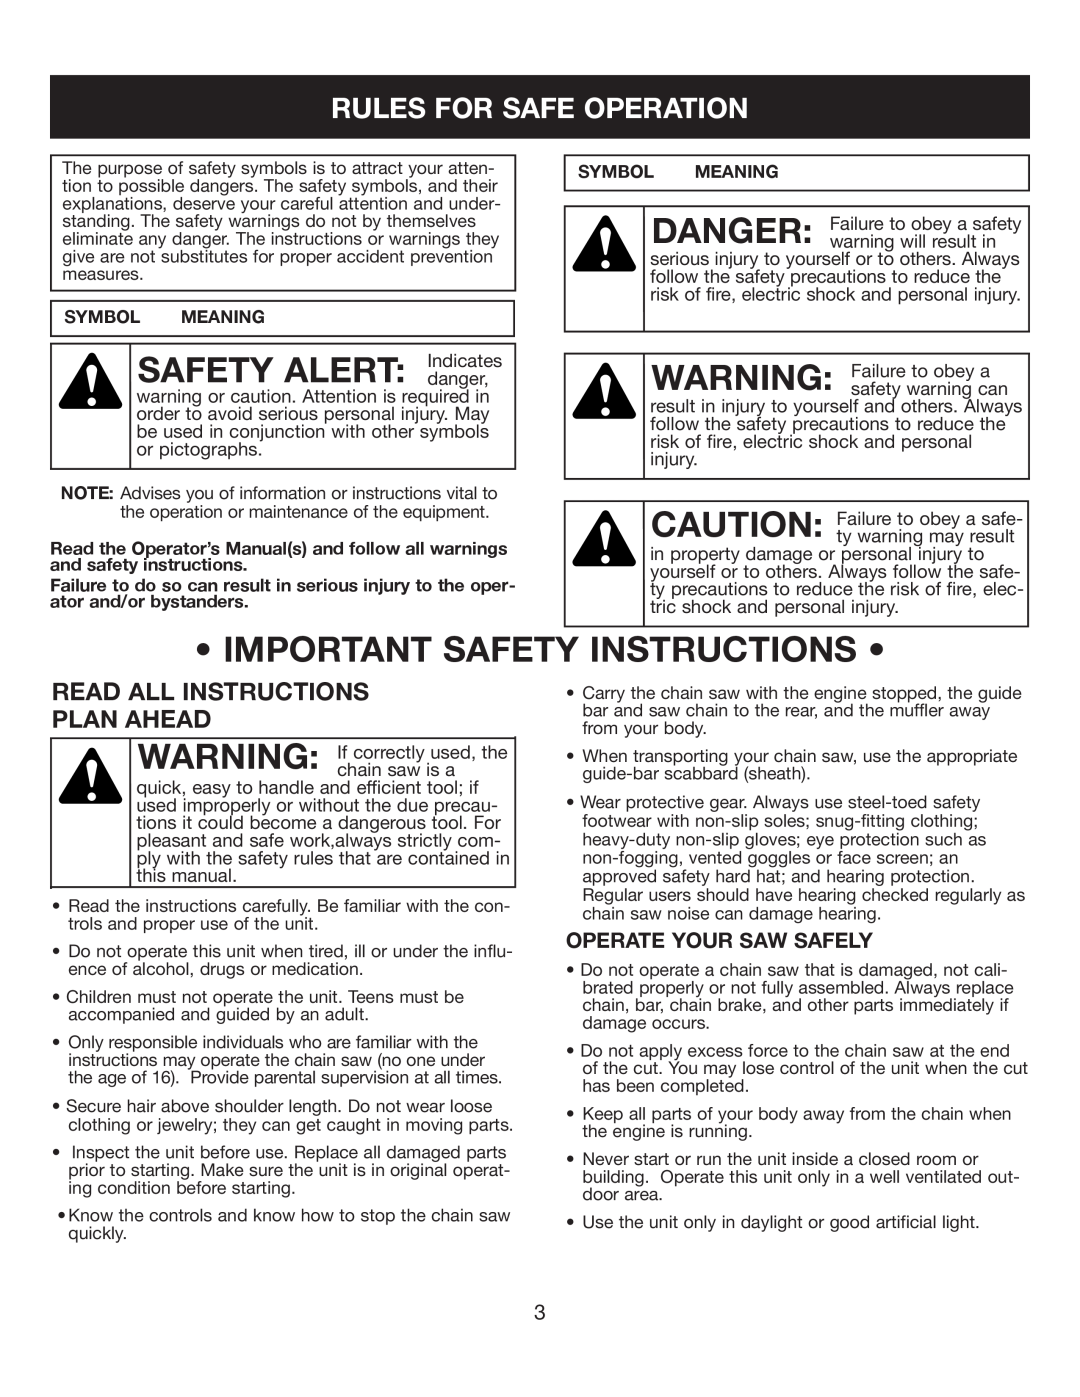 Sears 316.35084 manual Important Safety Instructions, Rules For Safe Operation, Read All Instructions Plan Ahead 